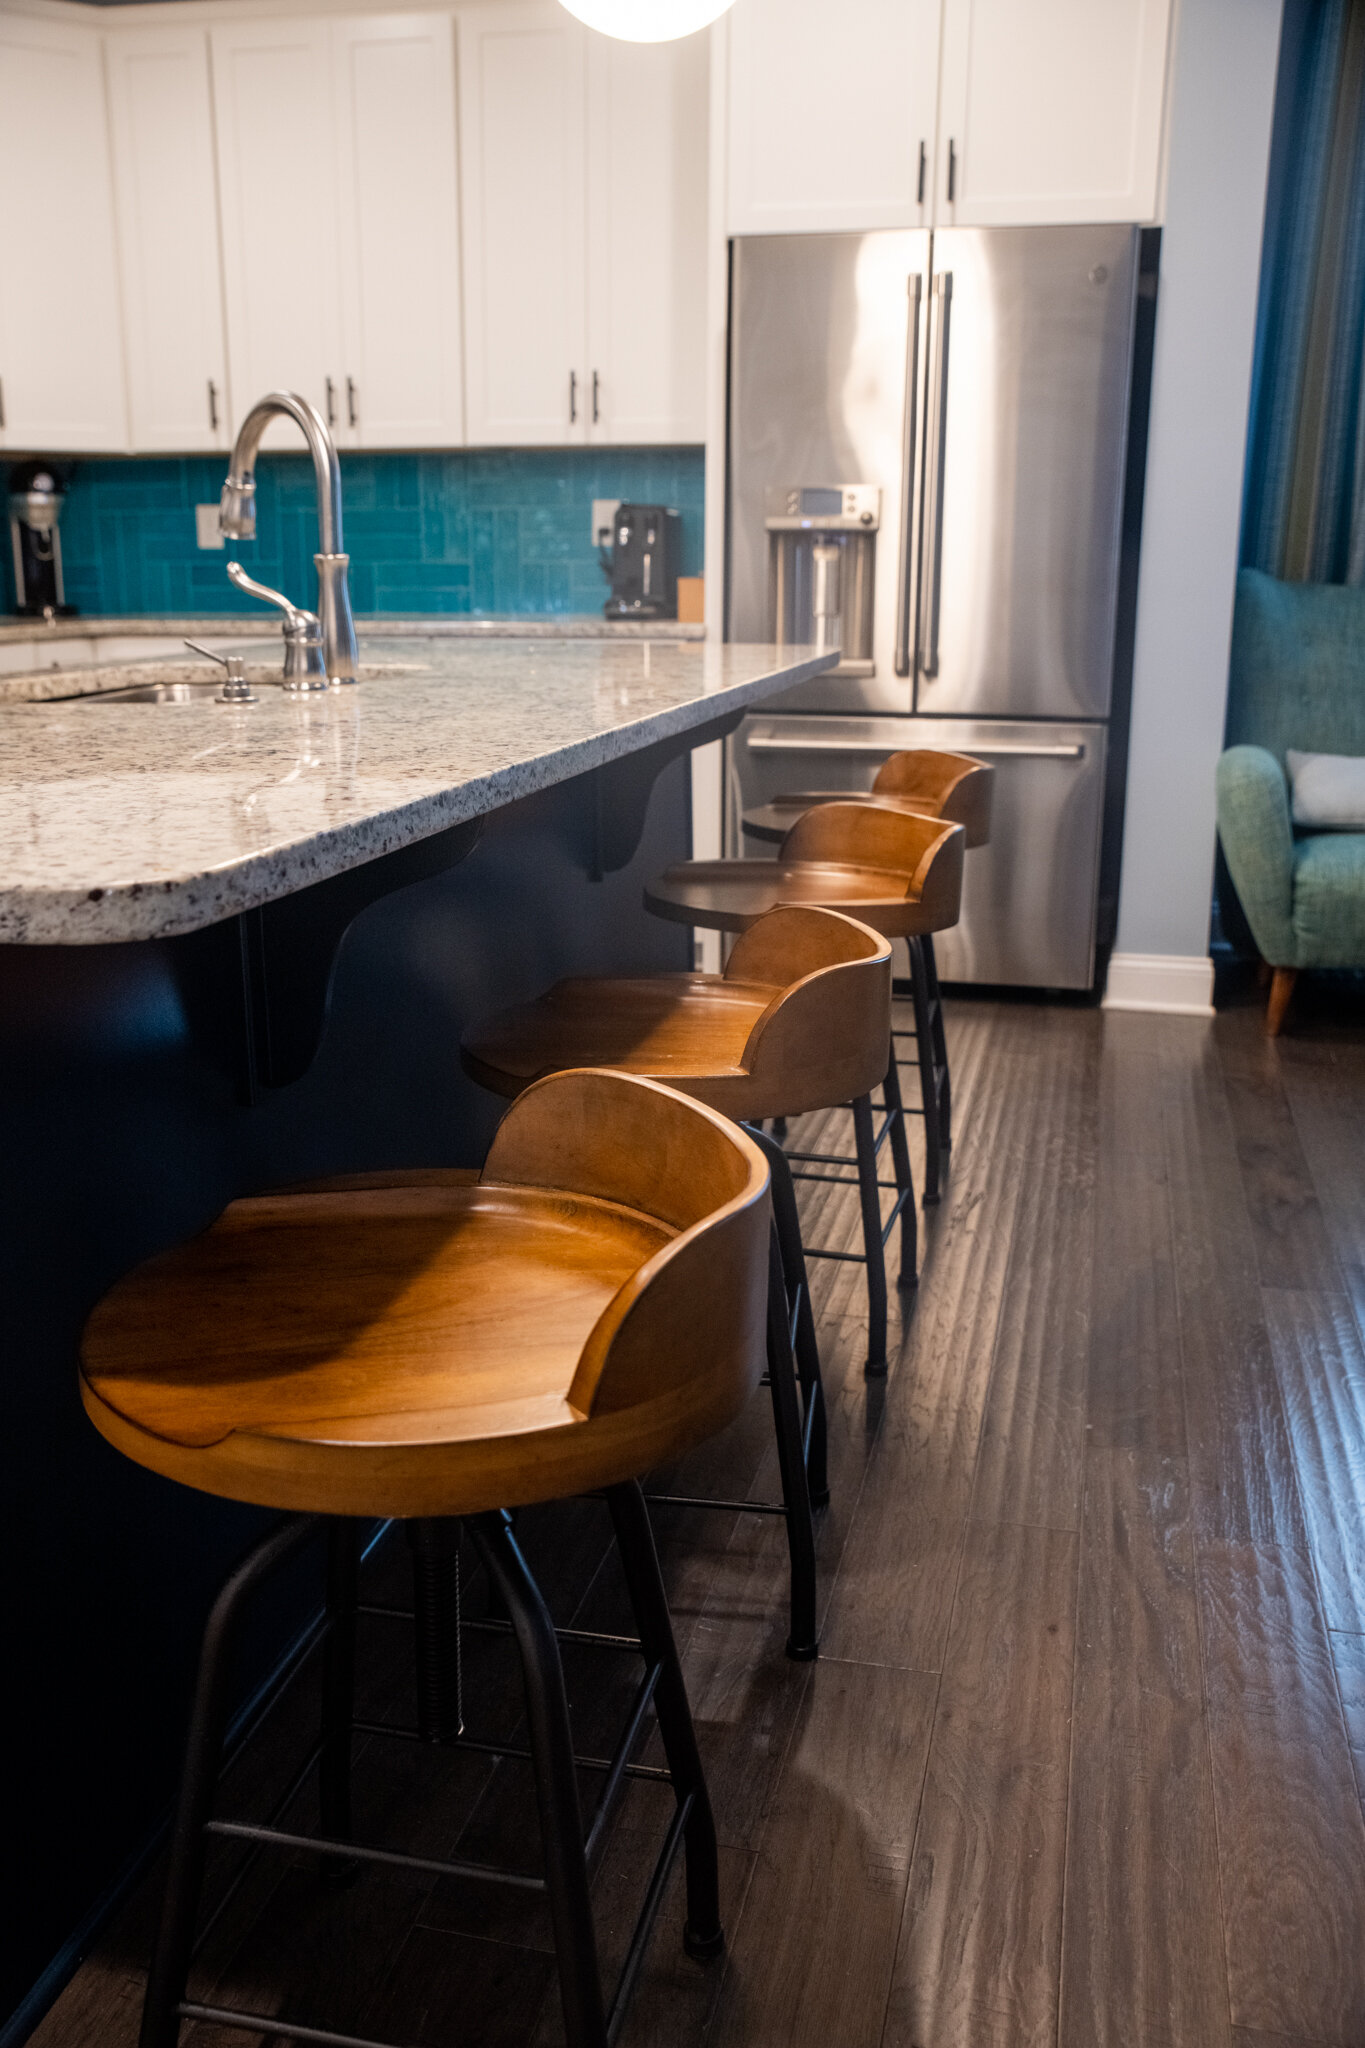 Dwell-Chic-Cool-Transitional-Home-Kitchen-Modern-Barstools-Detail.jpg